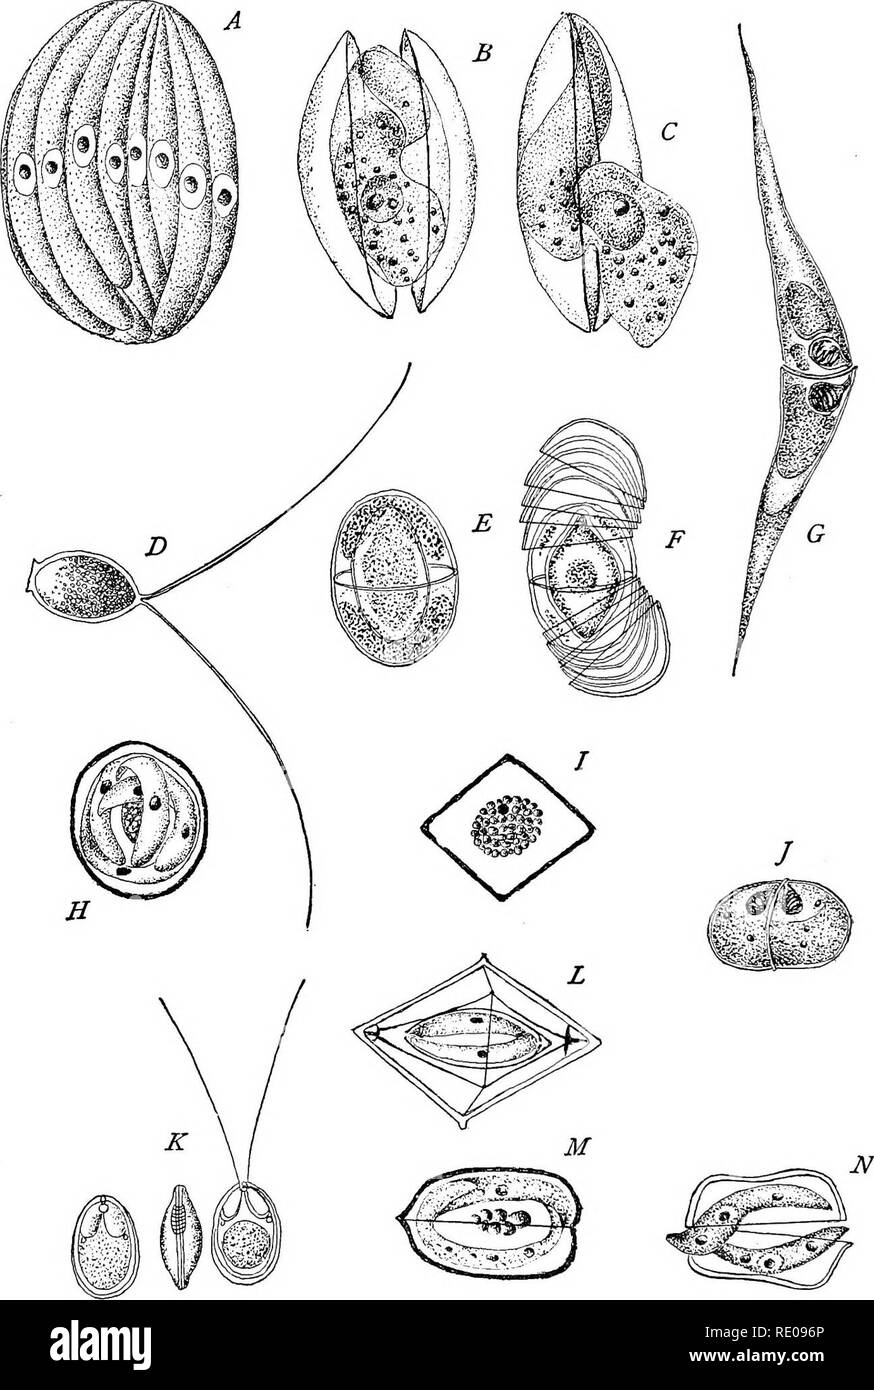 . The Protozoa. Protozoa. Fig- 83- — Types of spores. [Wasif.lewsky; A. SCHNEIDER; THELOHAN, etc.] A. EimerianepcB. /?, C. Bar&gt; omsiaor»ata. D. Tailed-spore of Gregirine. E, F. Ophryocystis Butschlli, with multiple epispores. G. Lcratomyxa splxzrulosa, //. Klossia helicis. I. Ciysfallo- spora Iheloharn. J. Leptotkeca a^ihs. K. Myxobolut elUpw'tdes. L. Crystallospora crystallotdes. M. Goussia clupearum. N. Adelea ovata. Coiled threads are shown in G and J, the extruded thread in K.. Please note that these images are extracted from scanned page images that may have been digitally enhanced for Stock Photo